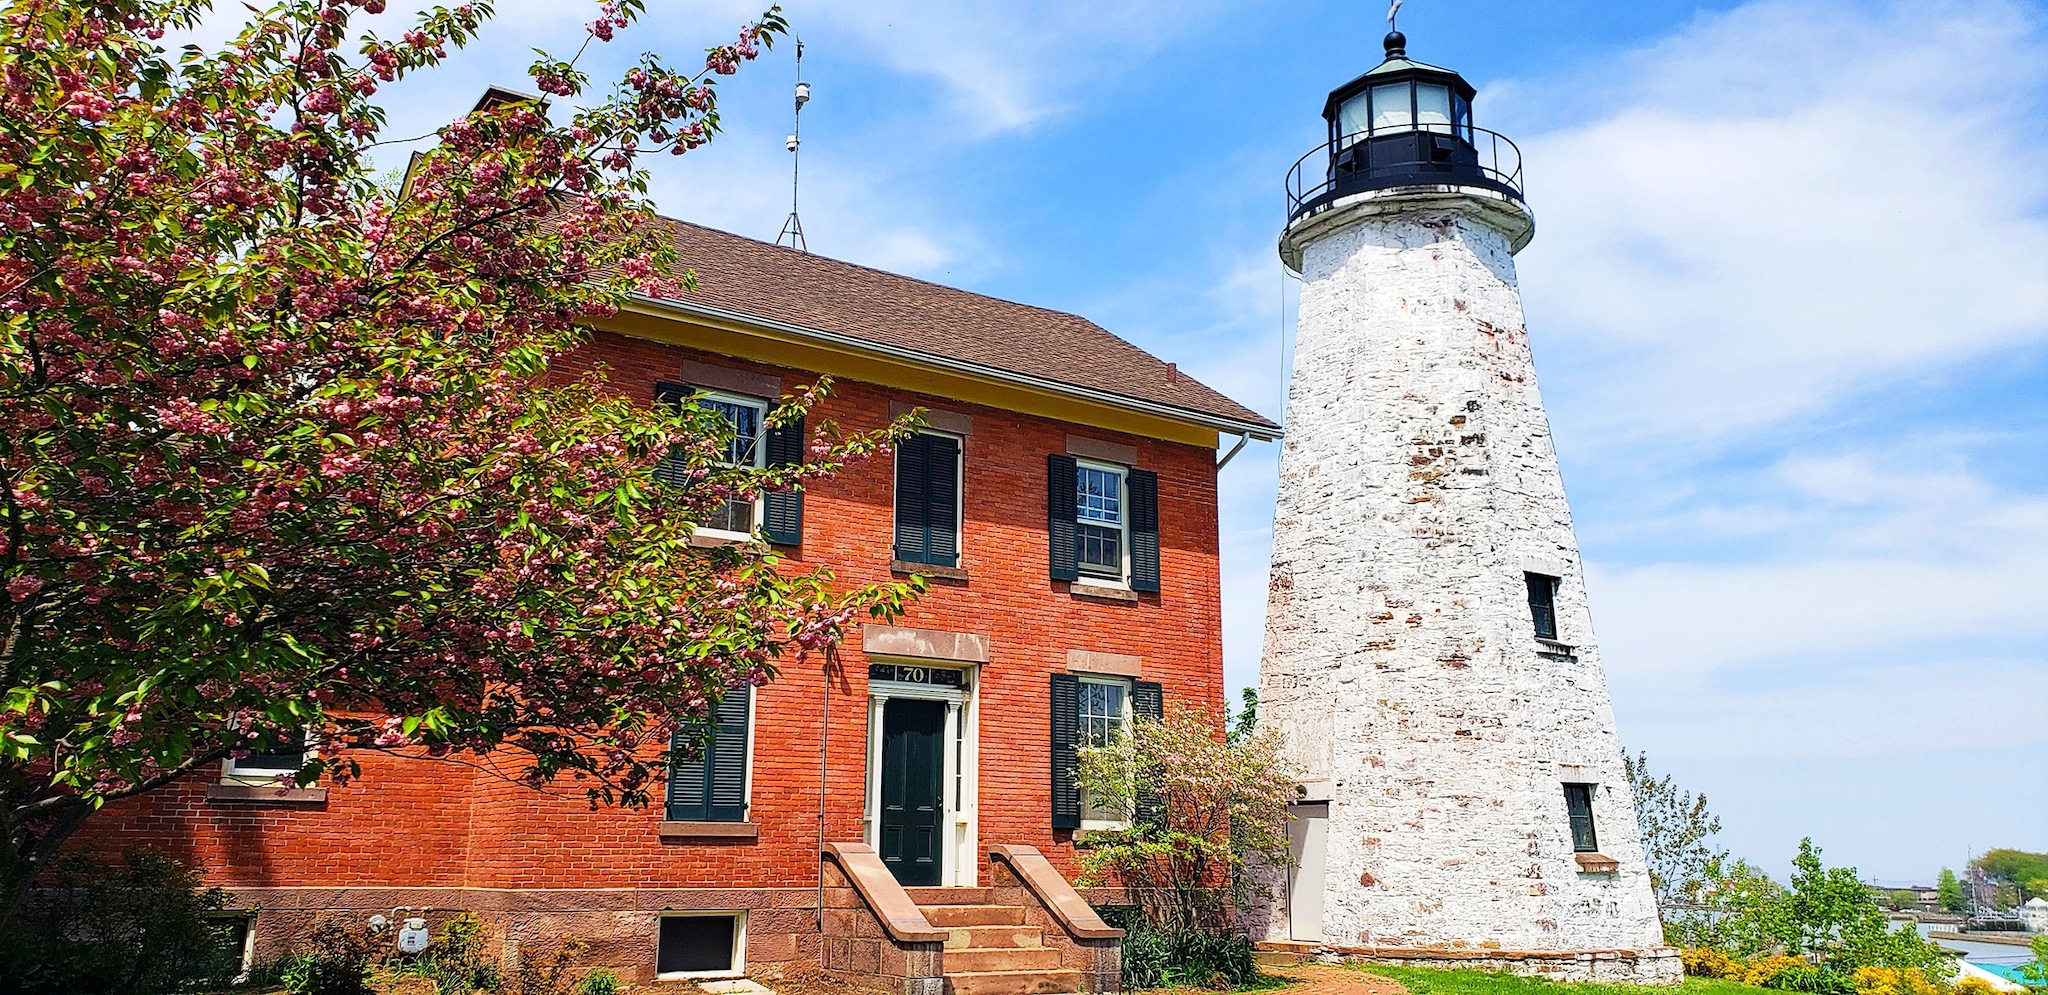 A red brick building with black shutters next to an old white lighthouse with a black top, surrounded by blooming trees and a clear blue sky.